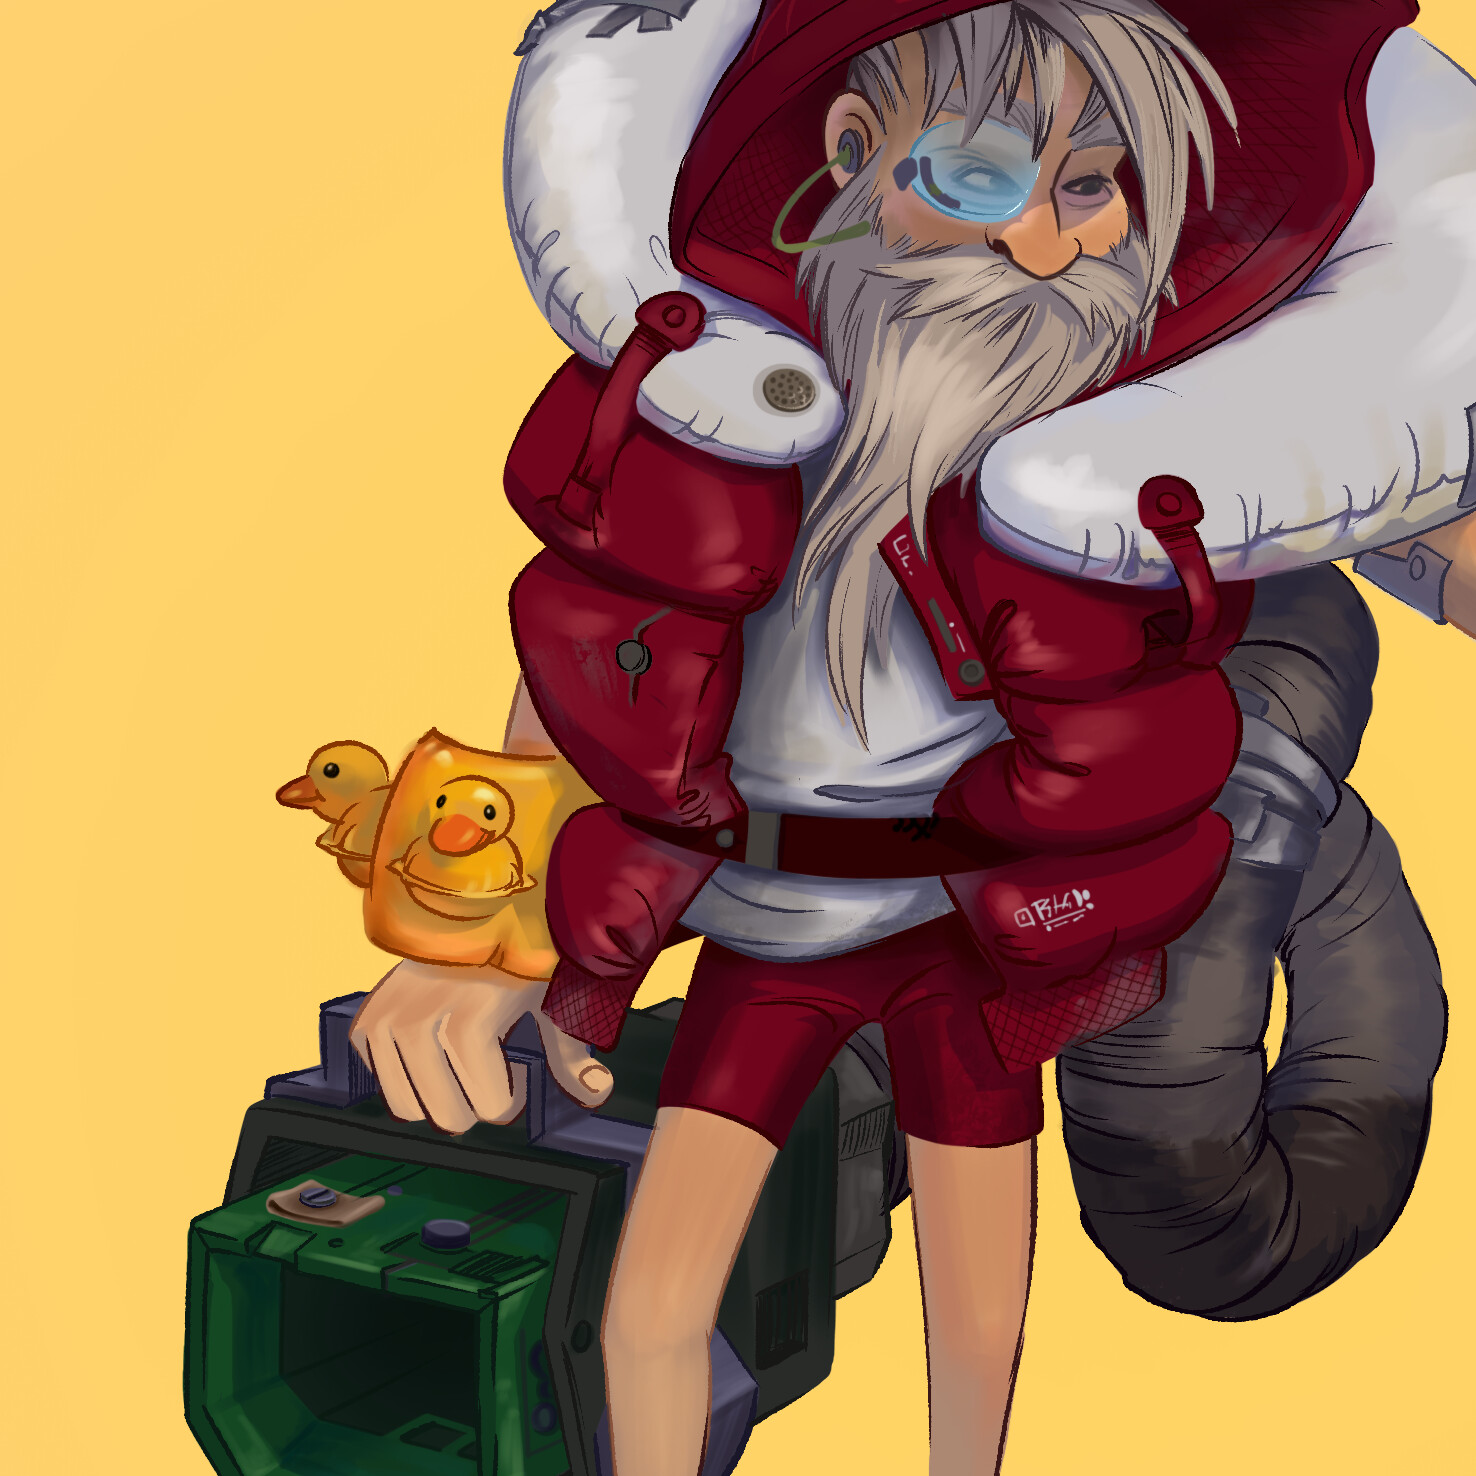 ArtStation - Santa is ready for the Hot weather